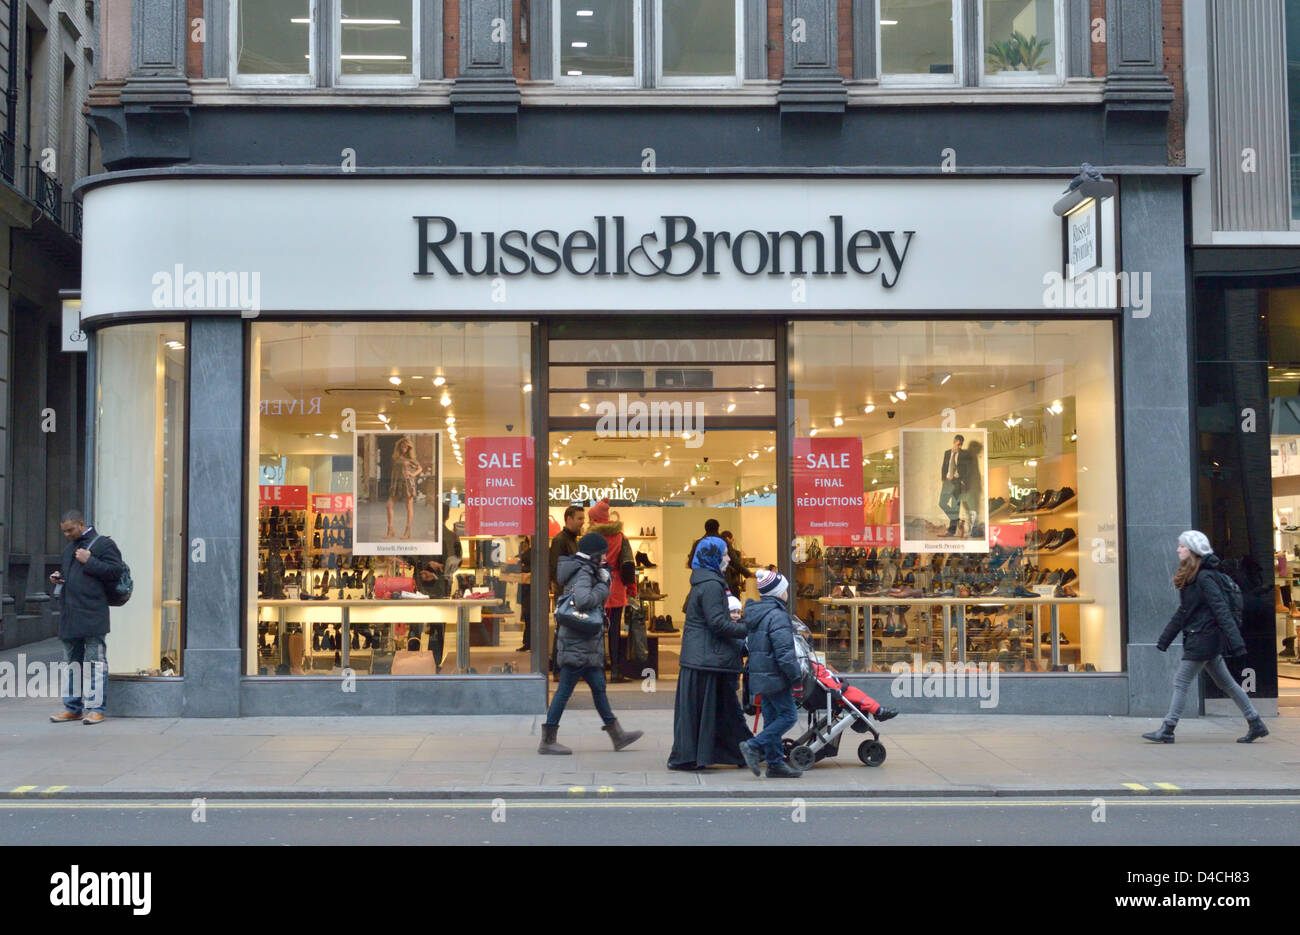 russell bromley shoes london